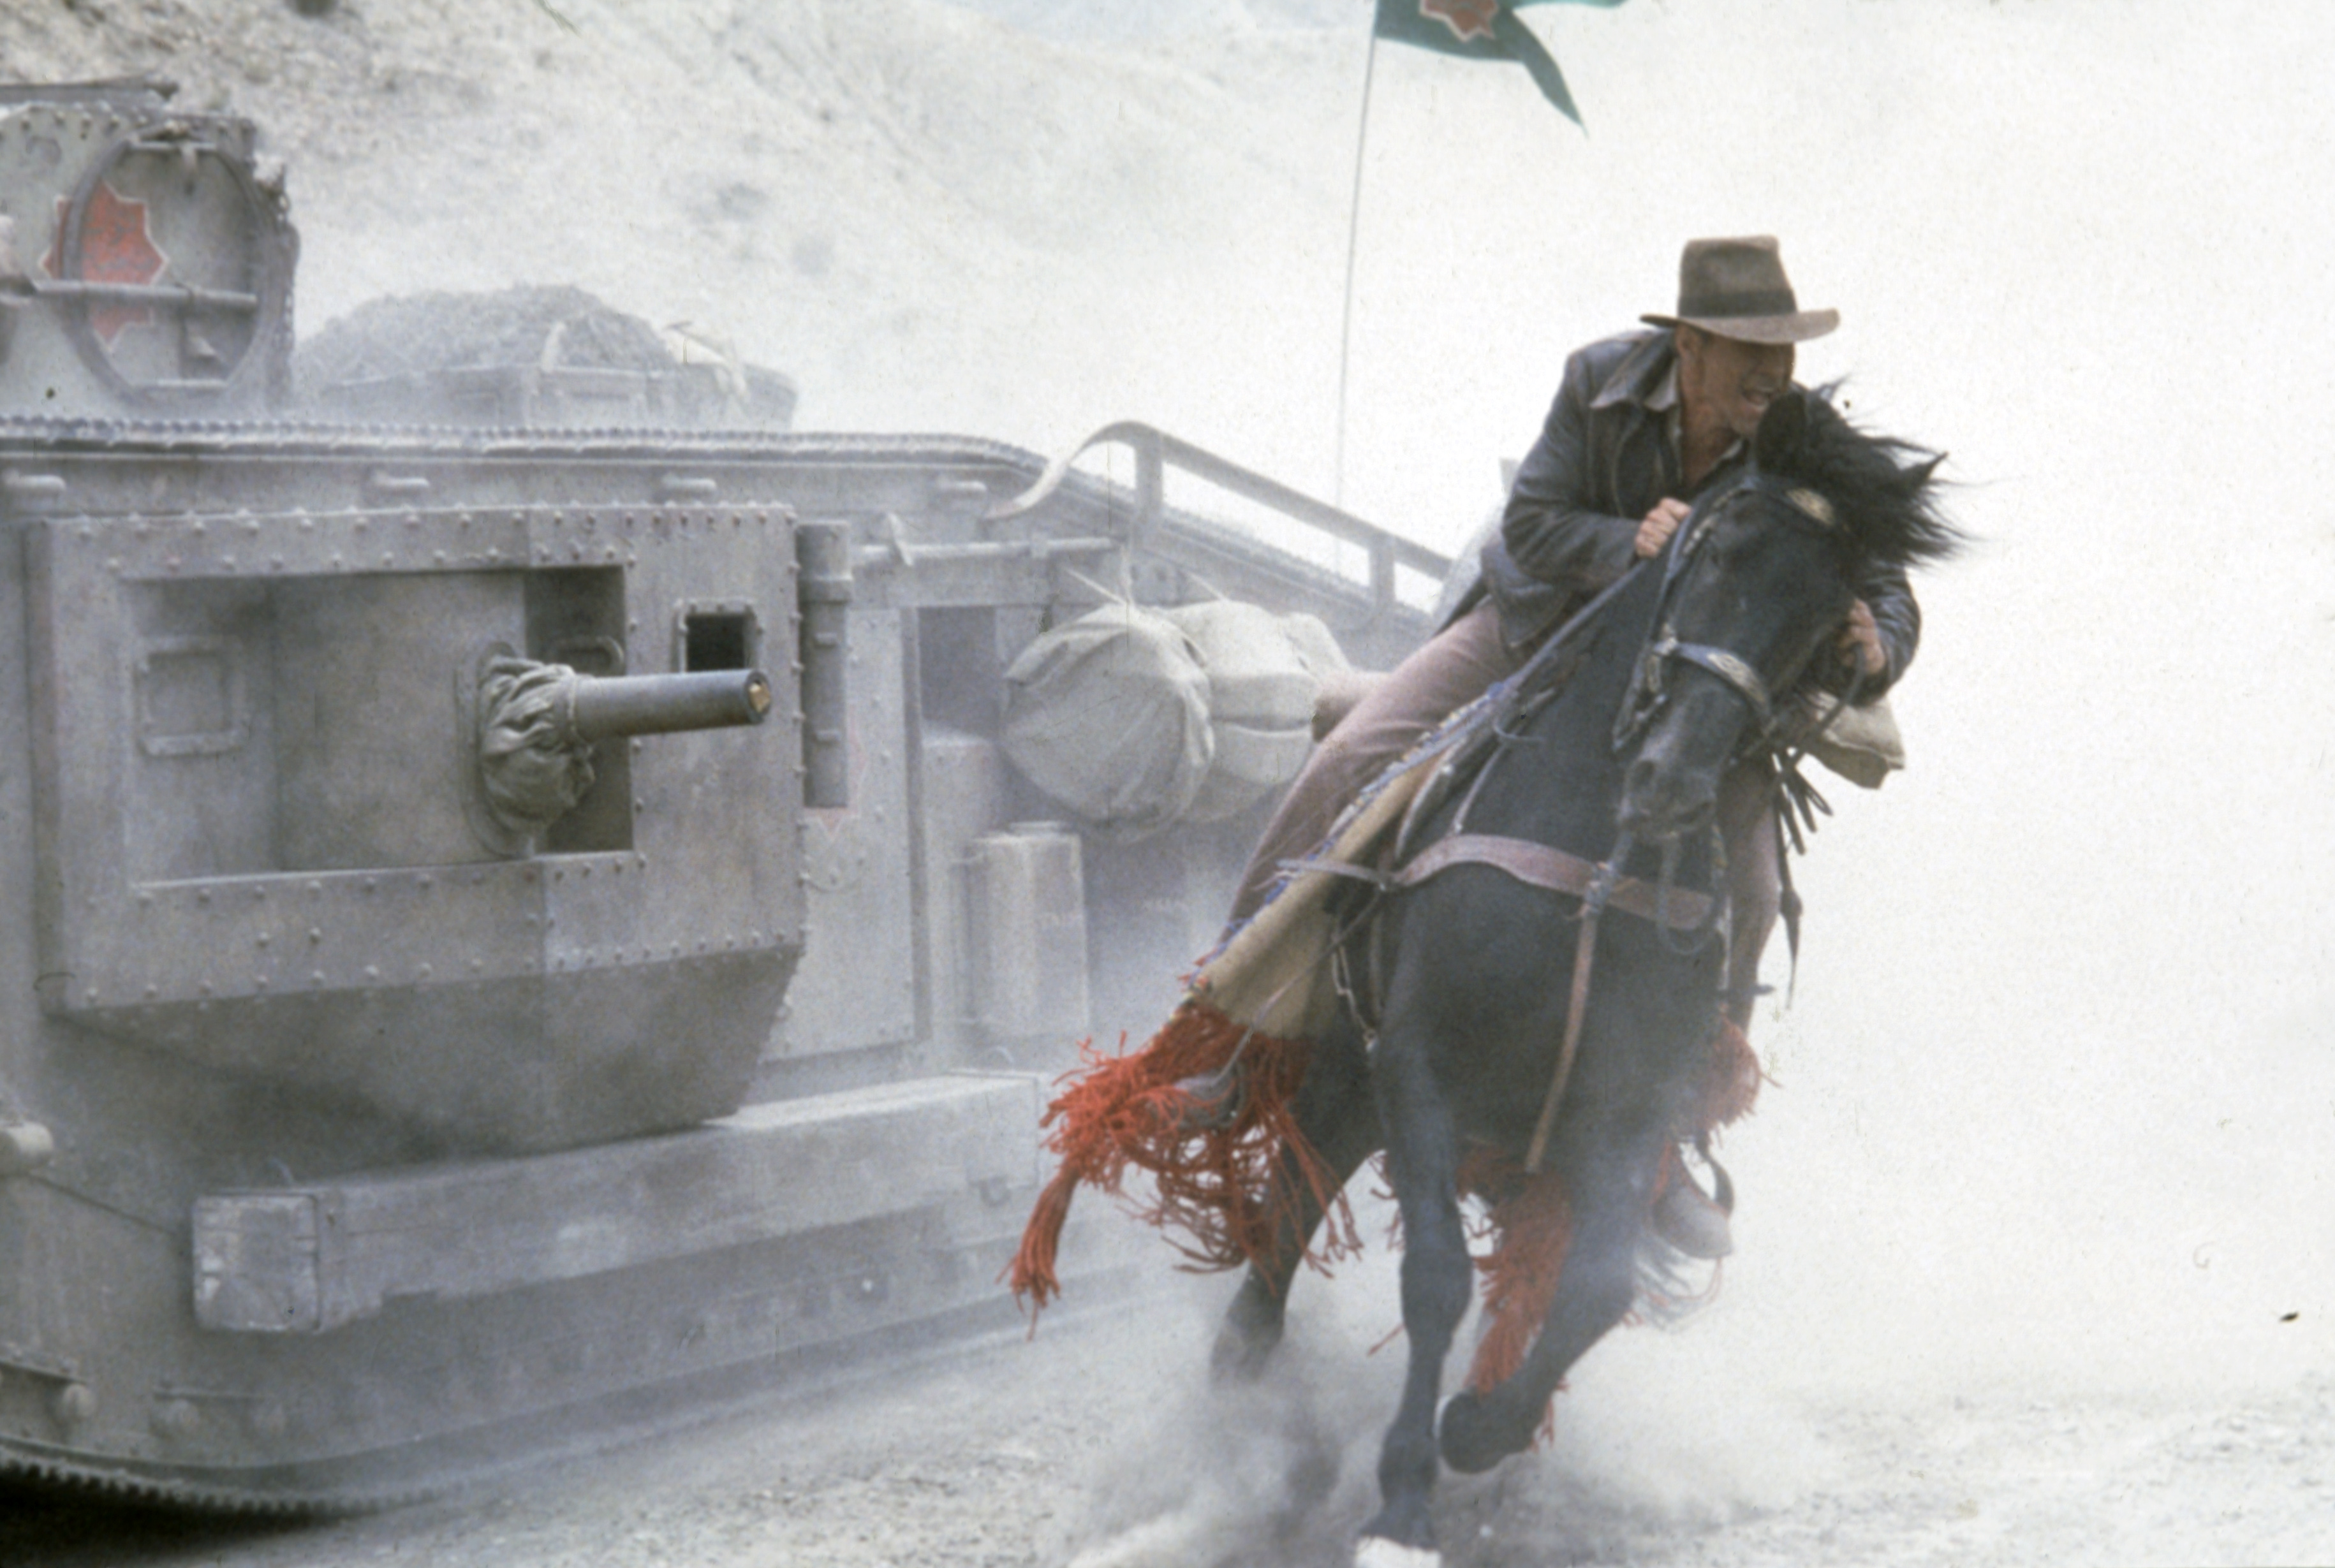 Harrison Ford in a scene from the film “Indiana Jones And The Last Crusade” in 1989 | Source: Getty Images